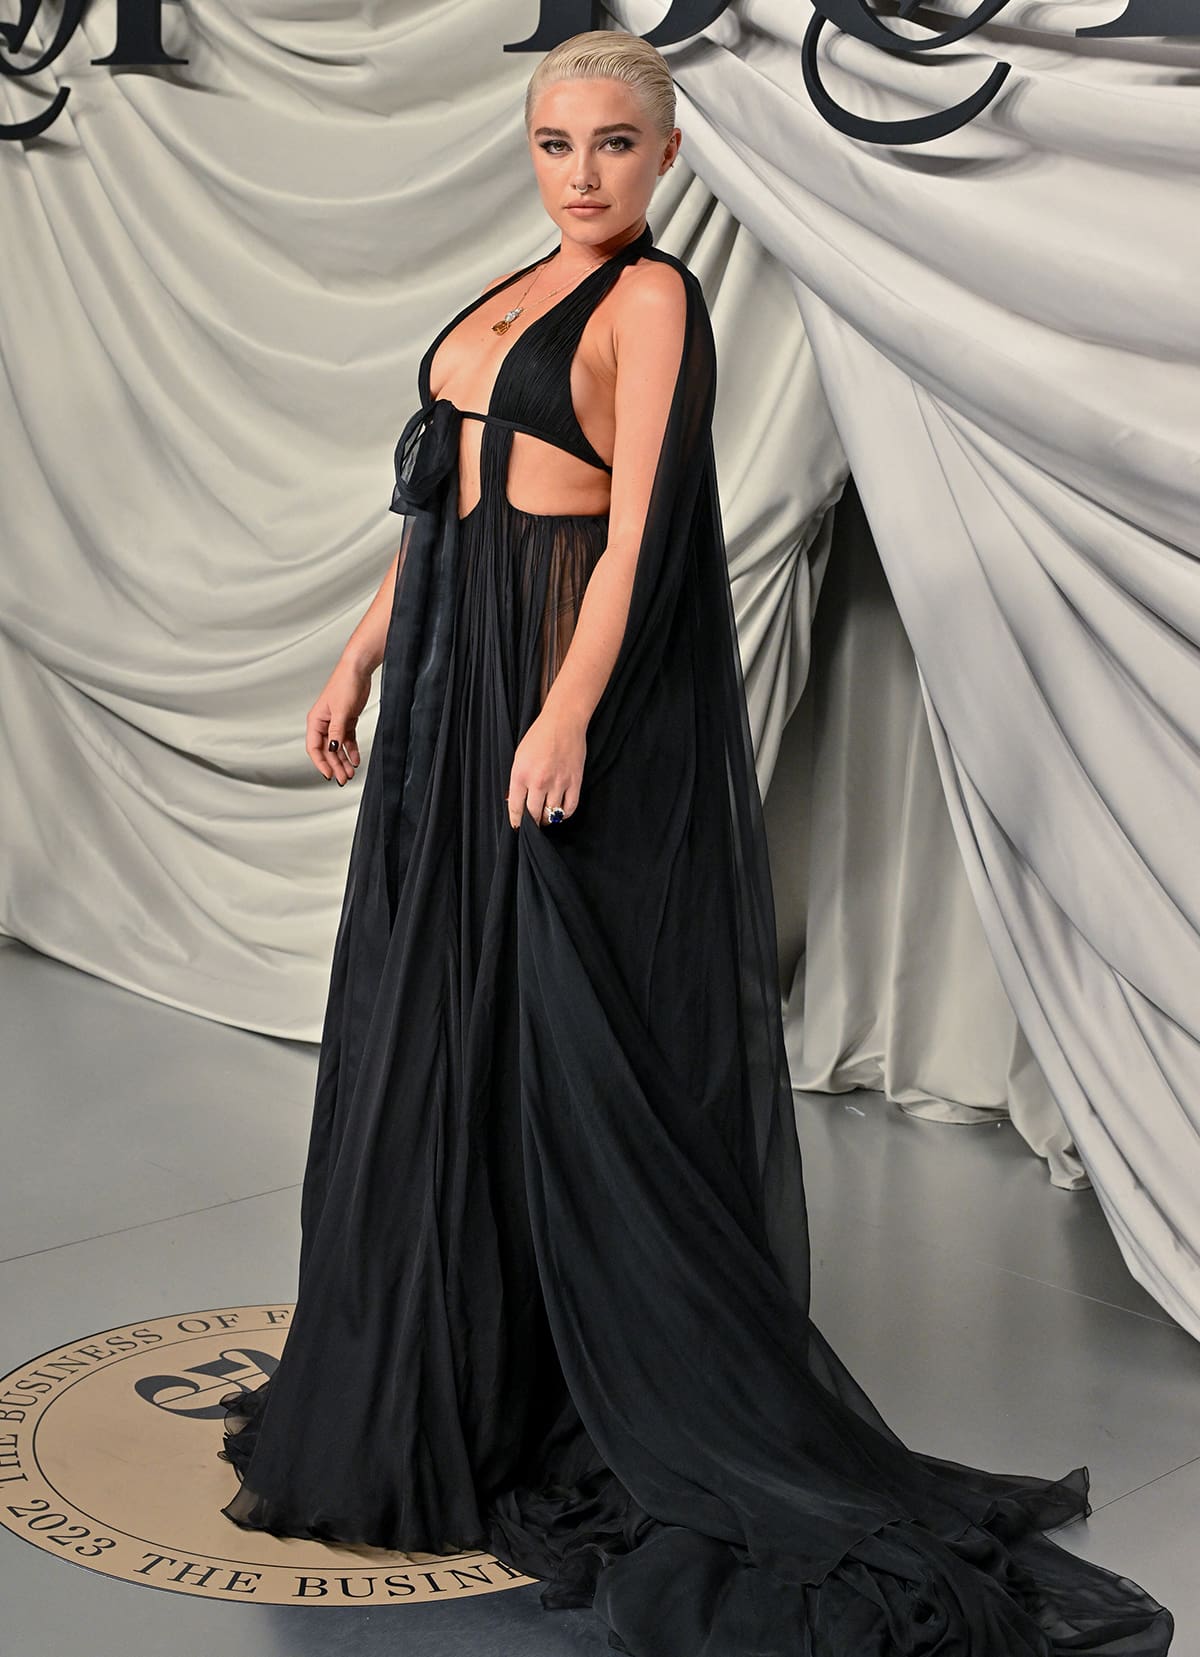 Florence Pugh flashes plenty of flesh in a sheer black Valentino gown with a bikini-style halter bodice, a tie front, and a flowing sheer skirt